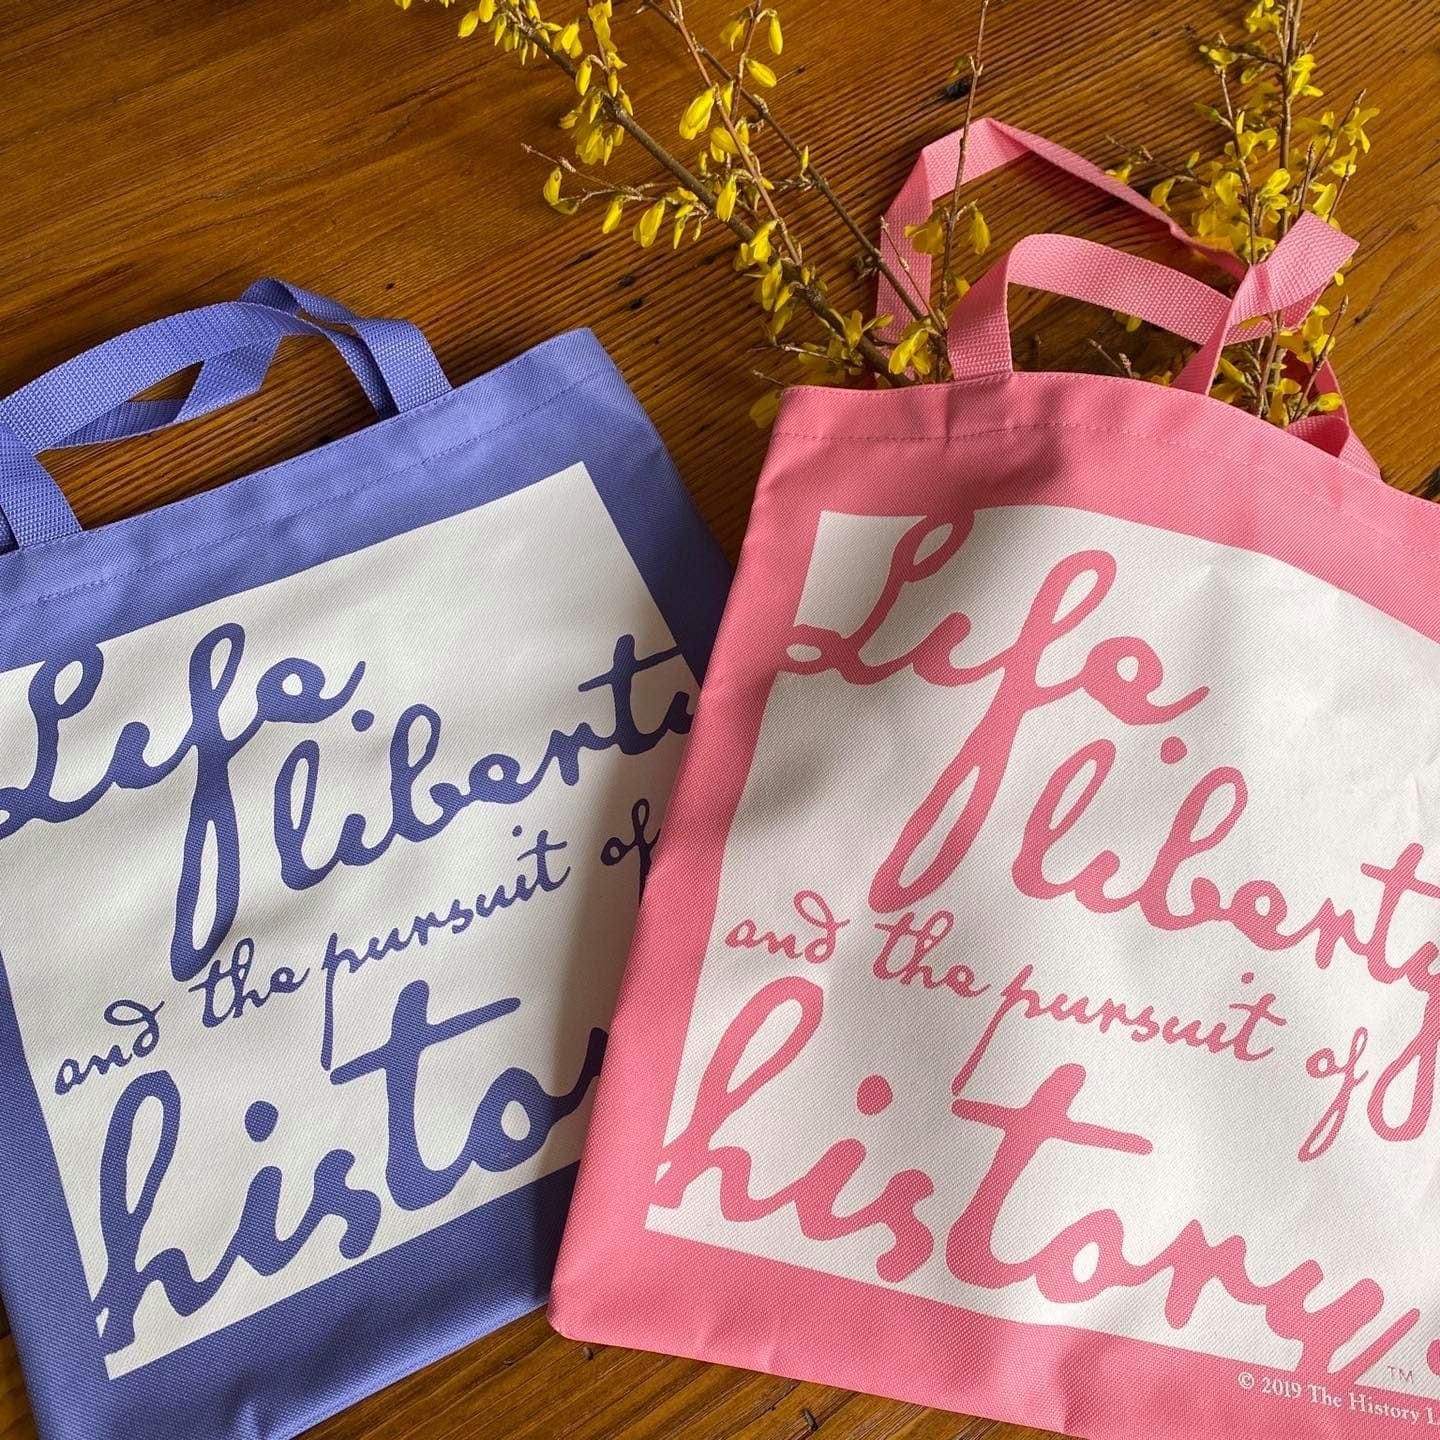 Purple and Pink "Life, liberty, and the pursuit of history" Tote bag - from the history list store